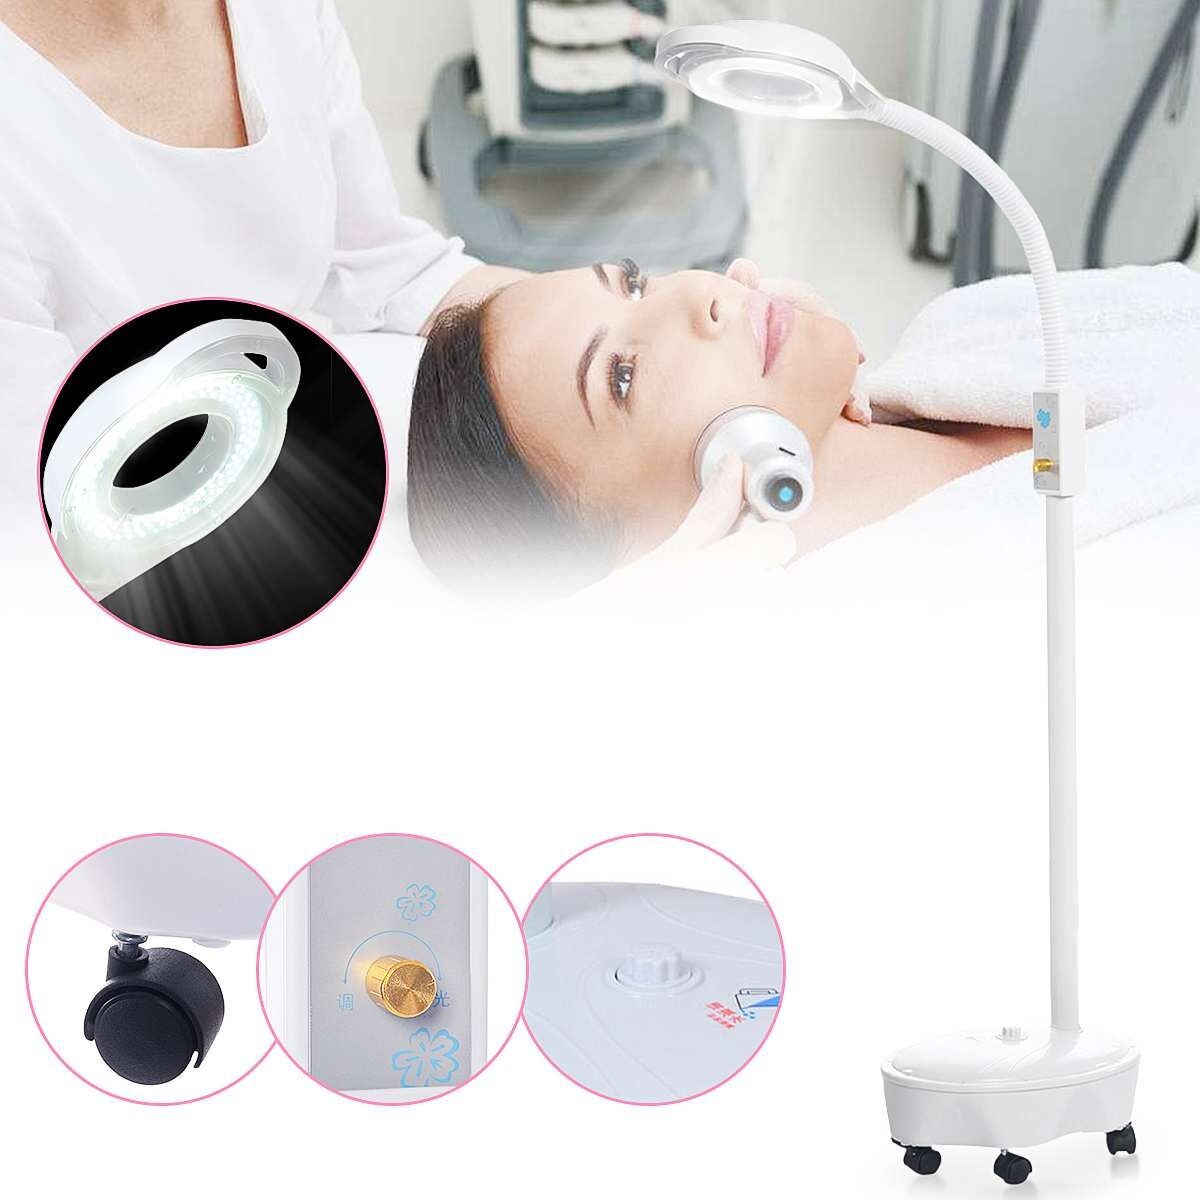 

220V 8X Diopter 120 LED Magnifying Floor Stand Lamp Magnifier Glass Cold Ligth Len Facial Light For Beauty Salon Nail Ta